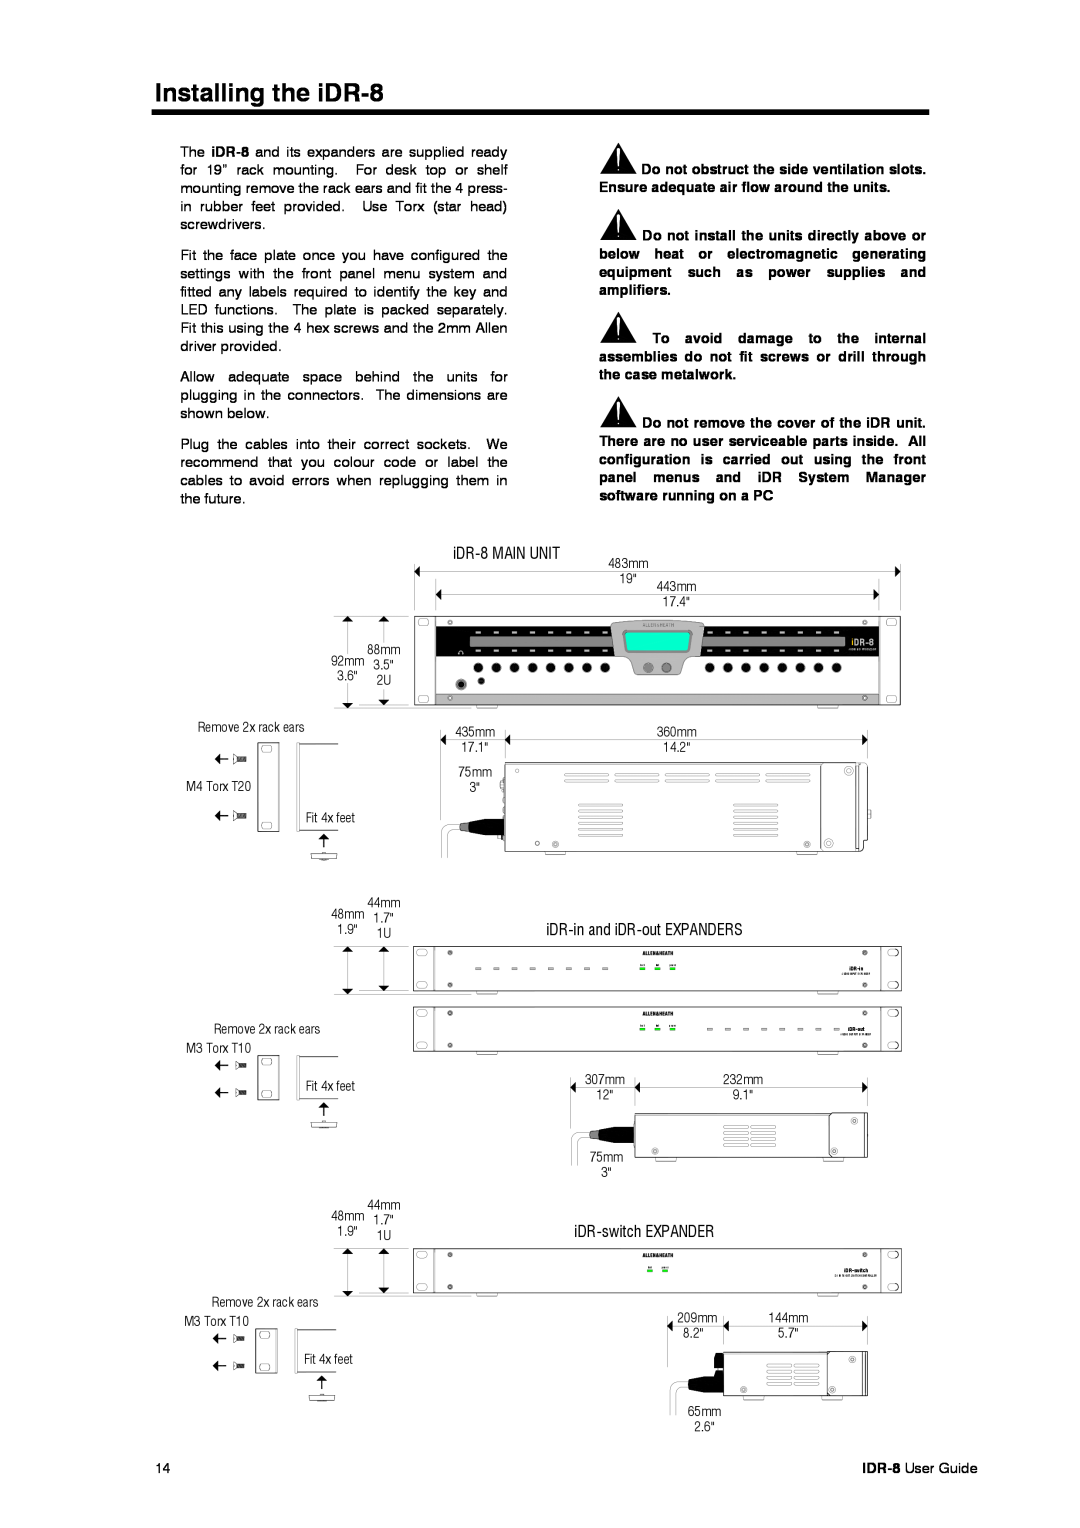 Compex Systems AP4530 manual Installing the iDR-8, iDR-8 MAIN UNIT, iDR-in and iDR-out EXPANDERS, iDR-switch EXPANDER 